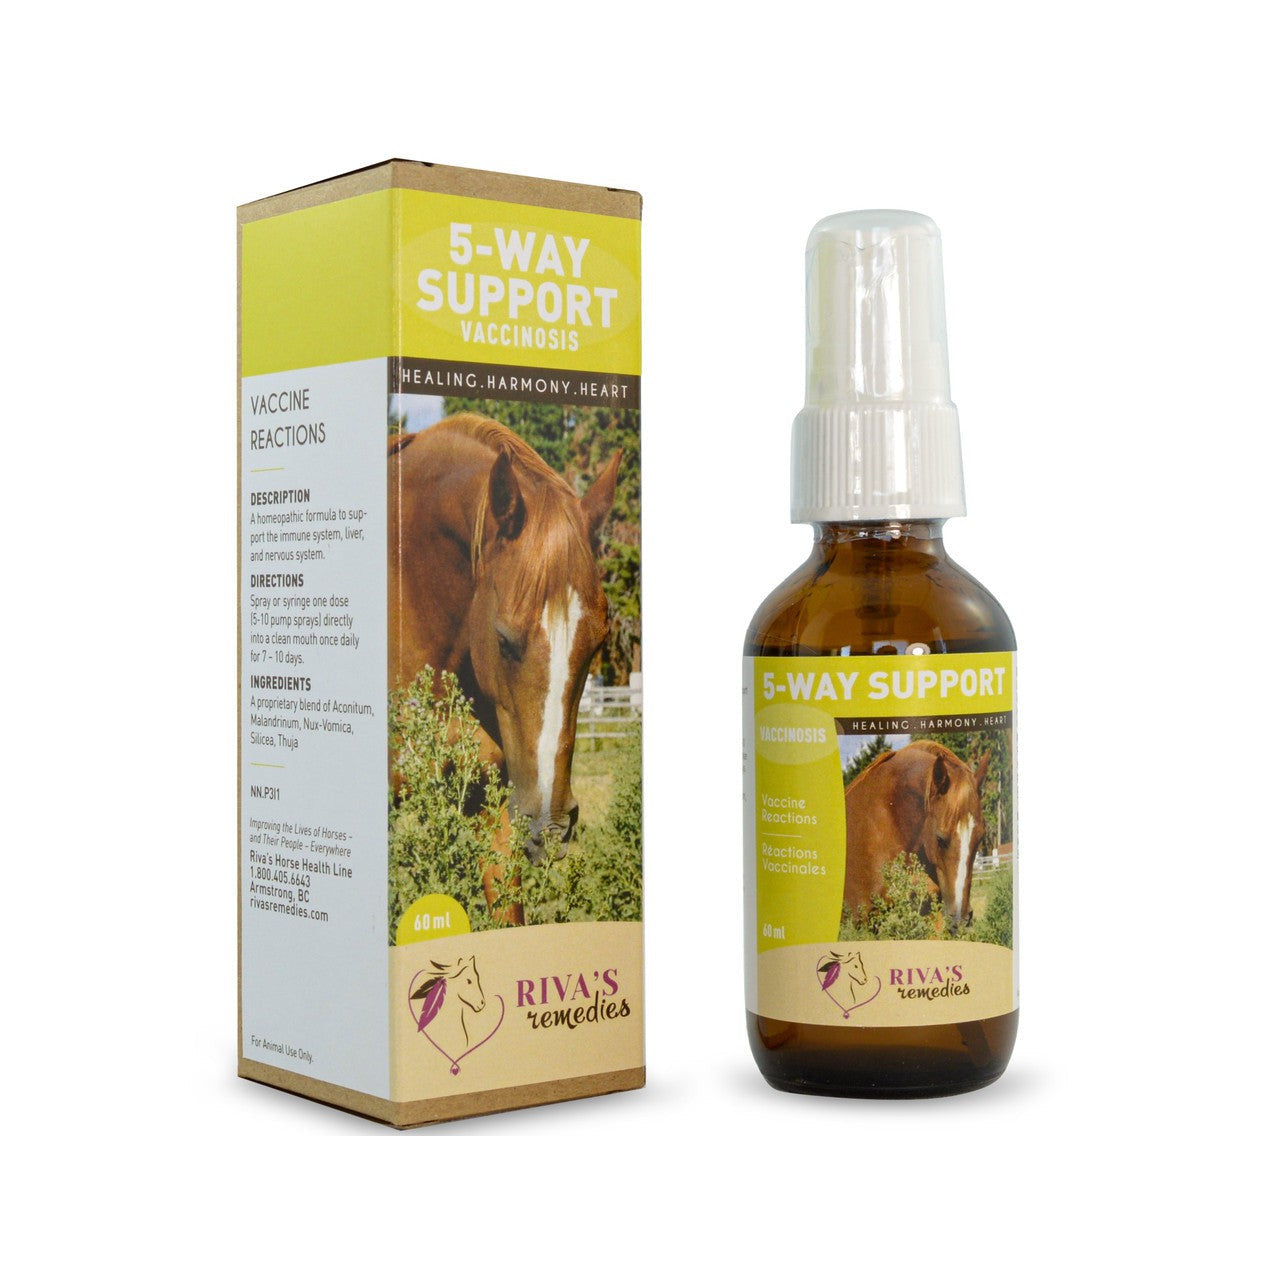 Riva's Remedies Equine 5-Way Support - 60ml